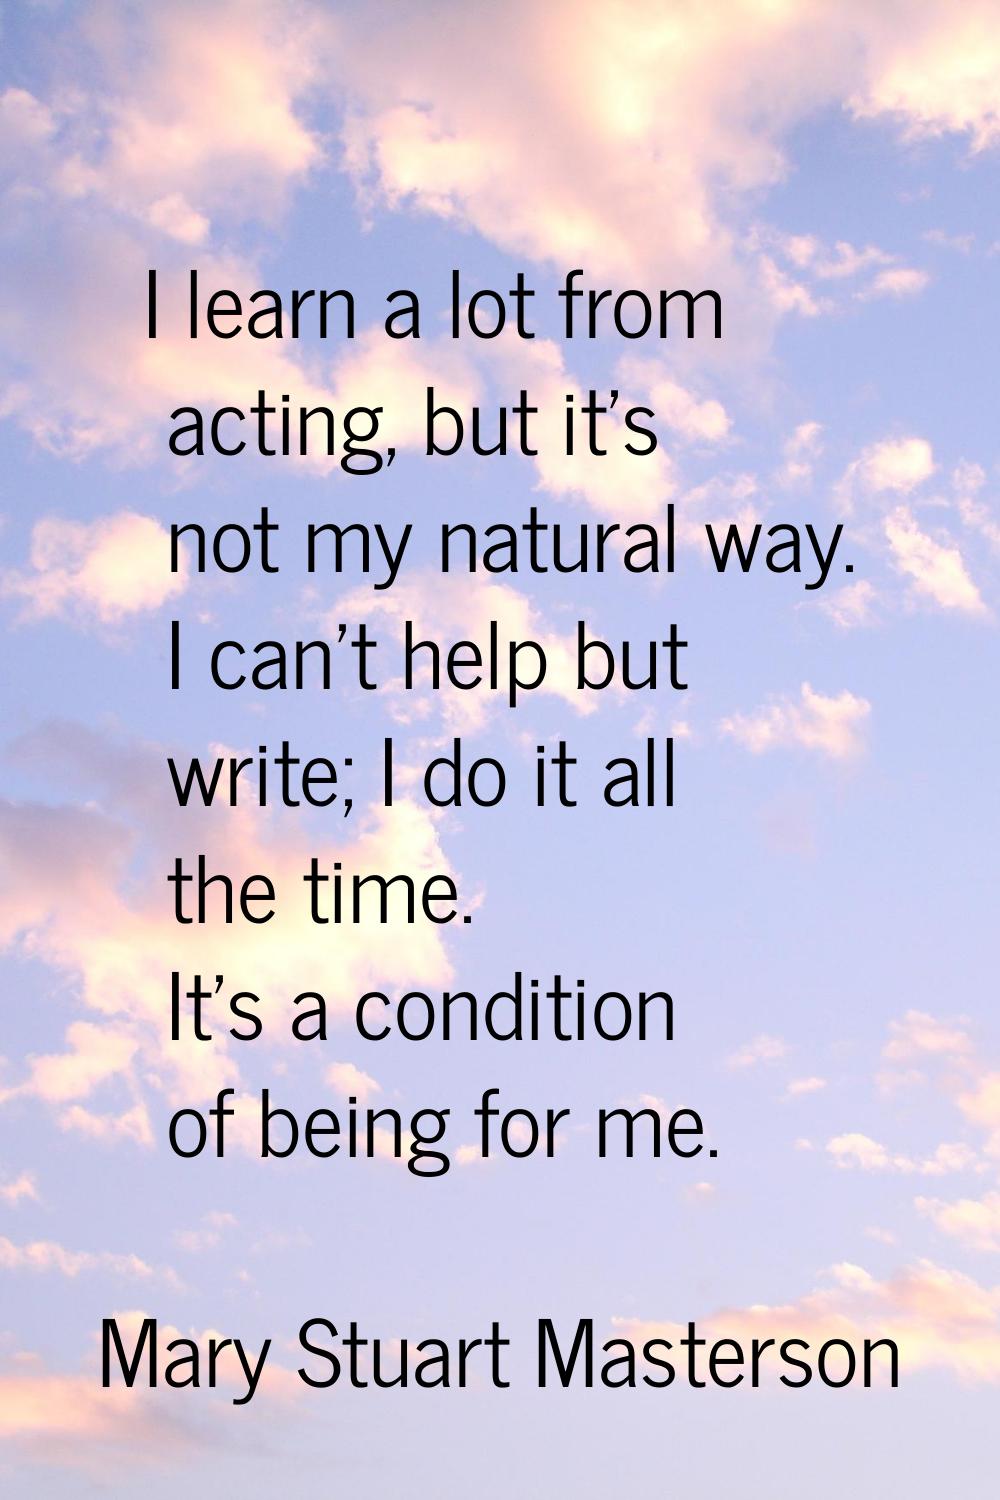 I learn a lot from acting, but it's not my natural way. I can't help but write; I do it all the tim